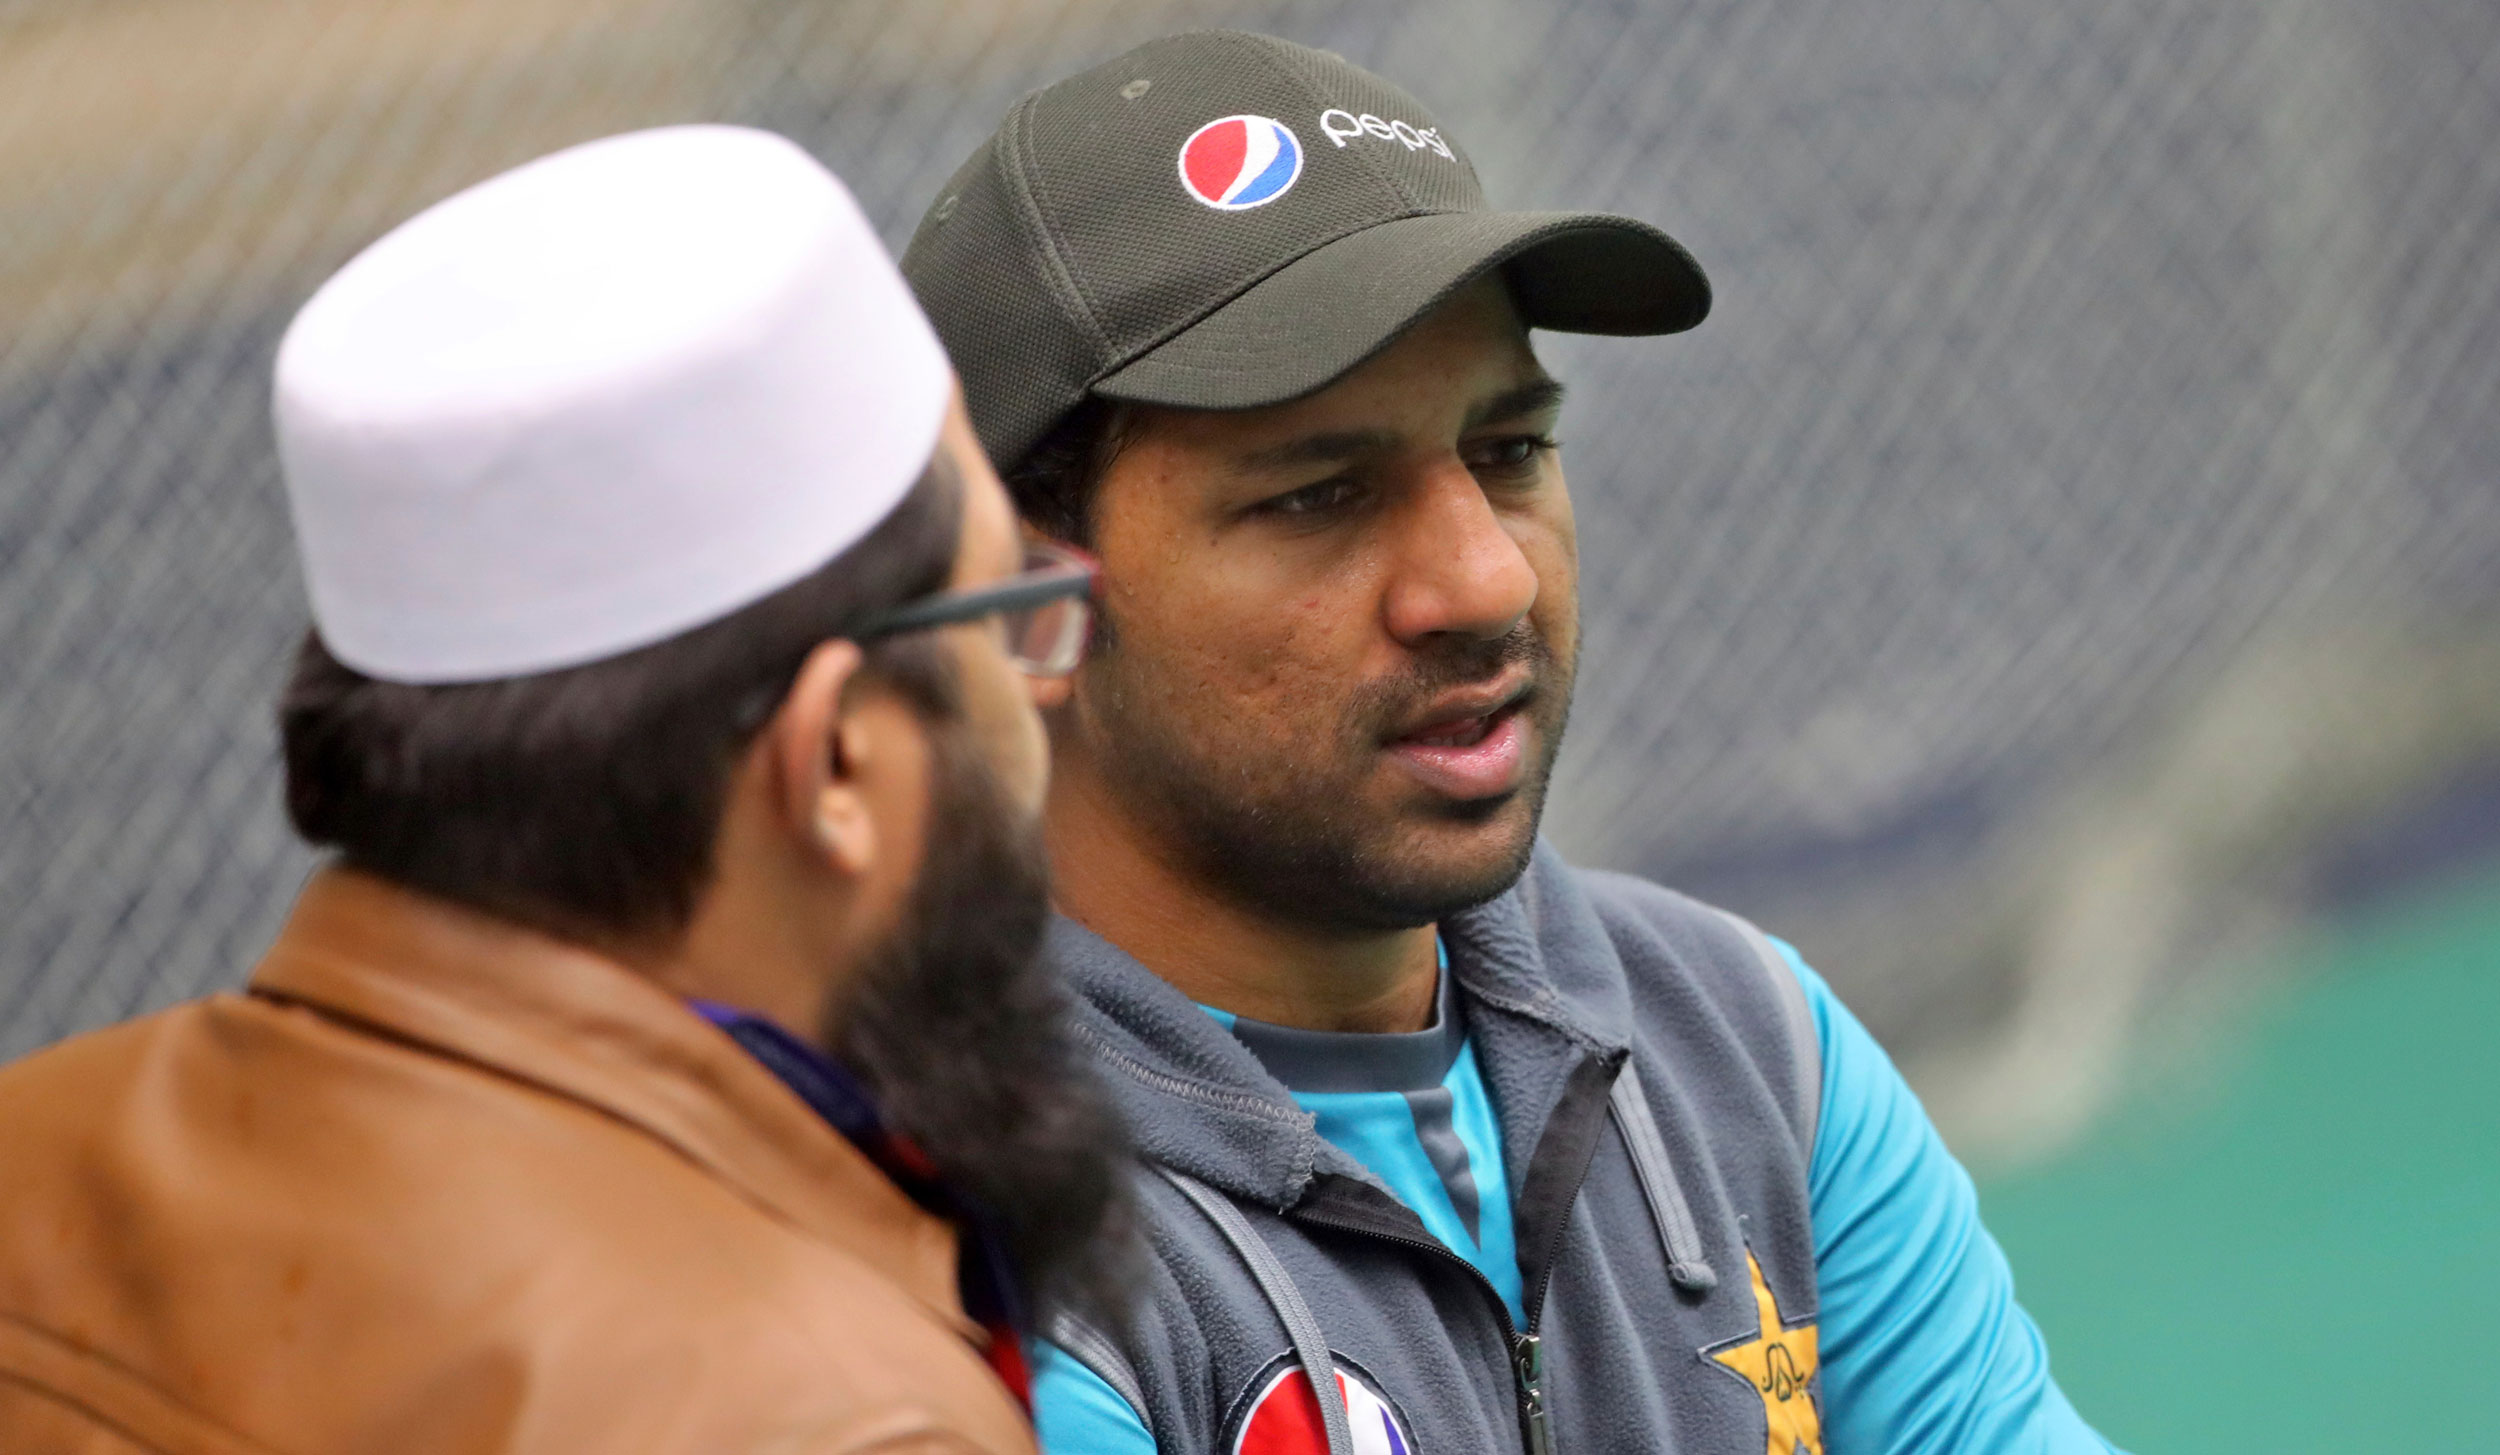 Pakistan cricket chief selector Inzamam-ul-Haq (left) listens to captain Sarfaraz Ahmed during a training session ahead of their ICC Cricket World Cup match against India at Old Trafford in Manchester, on June 15, 2019. 
